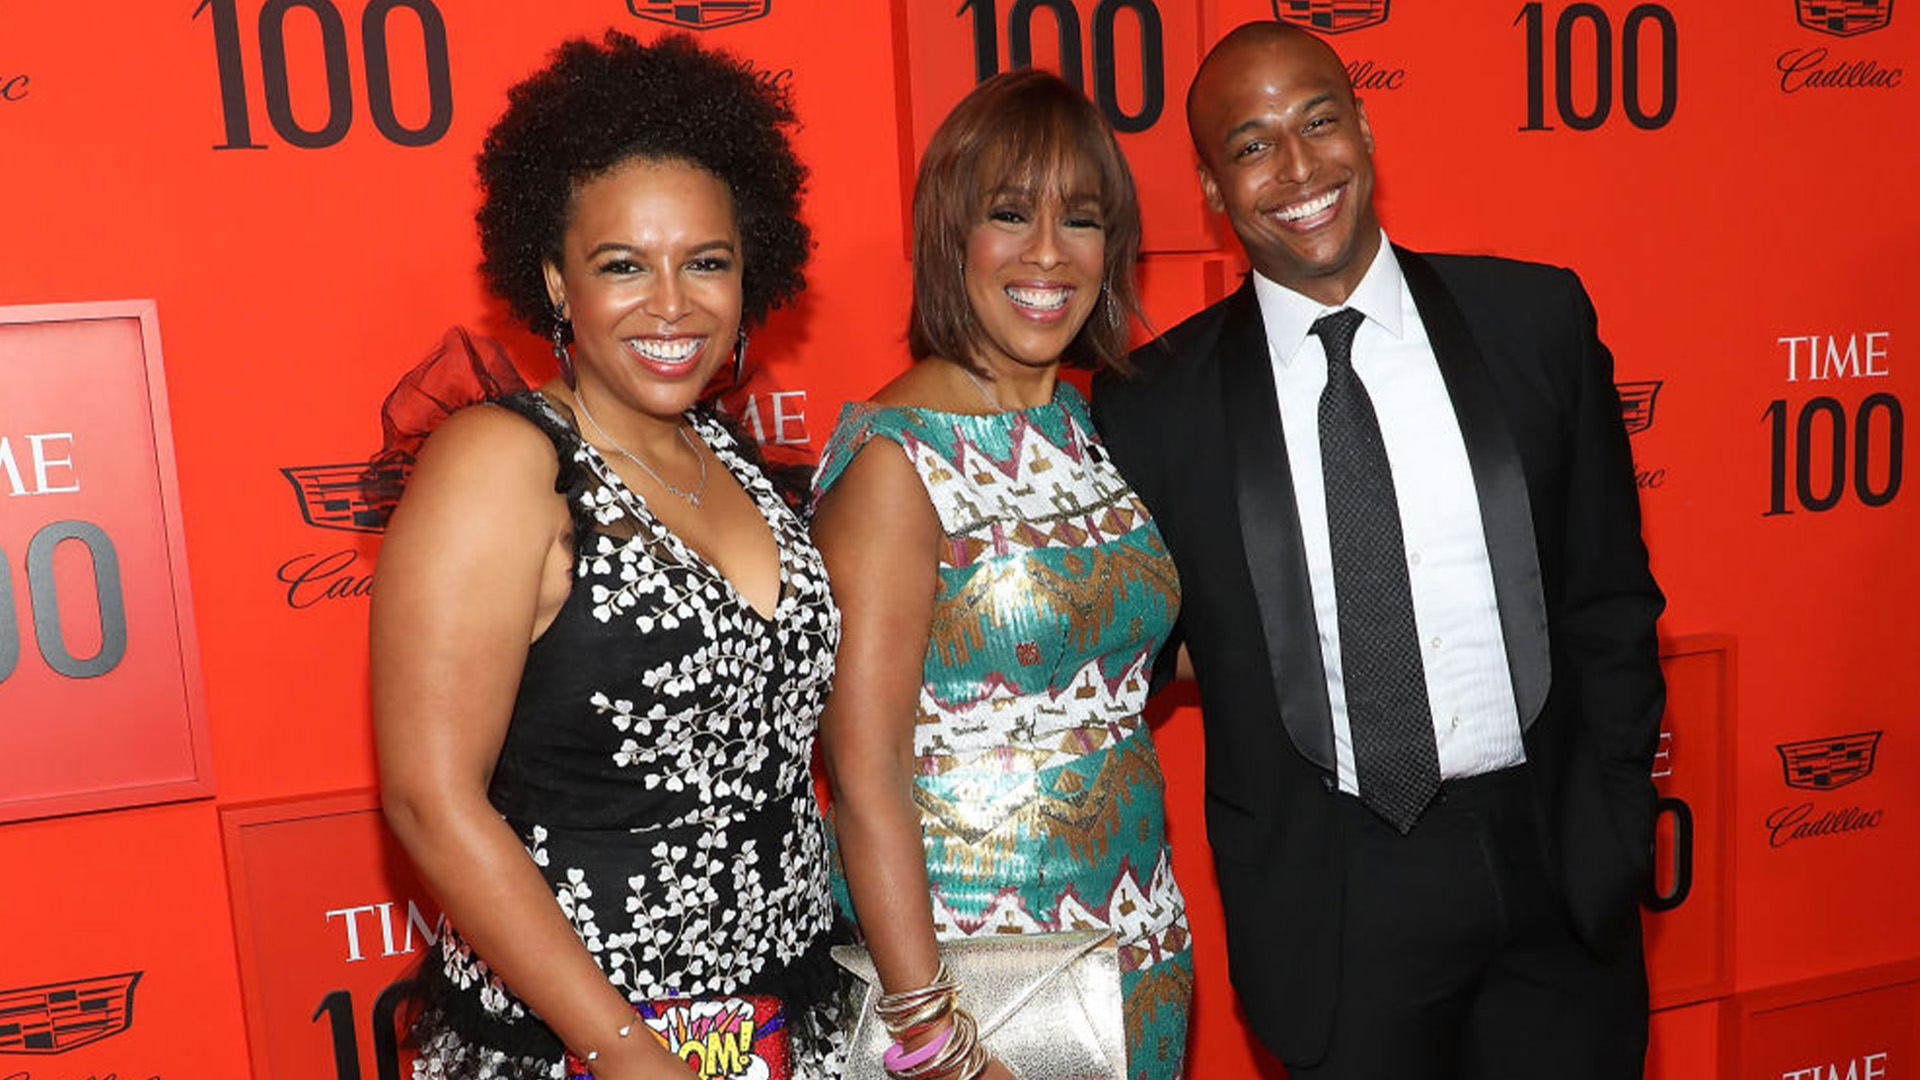 Gayle King Built A Career As An Acclaimed Journalist, But Her Kids Are Making Their Own Waves In VC And Social Impact